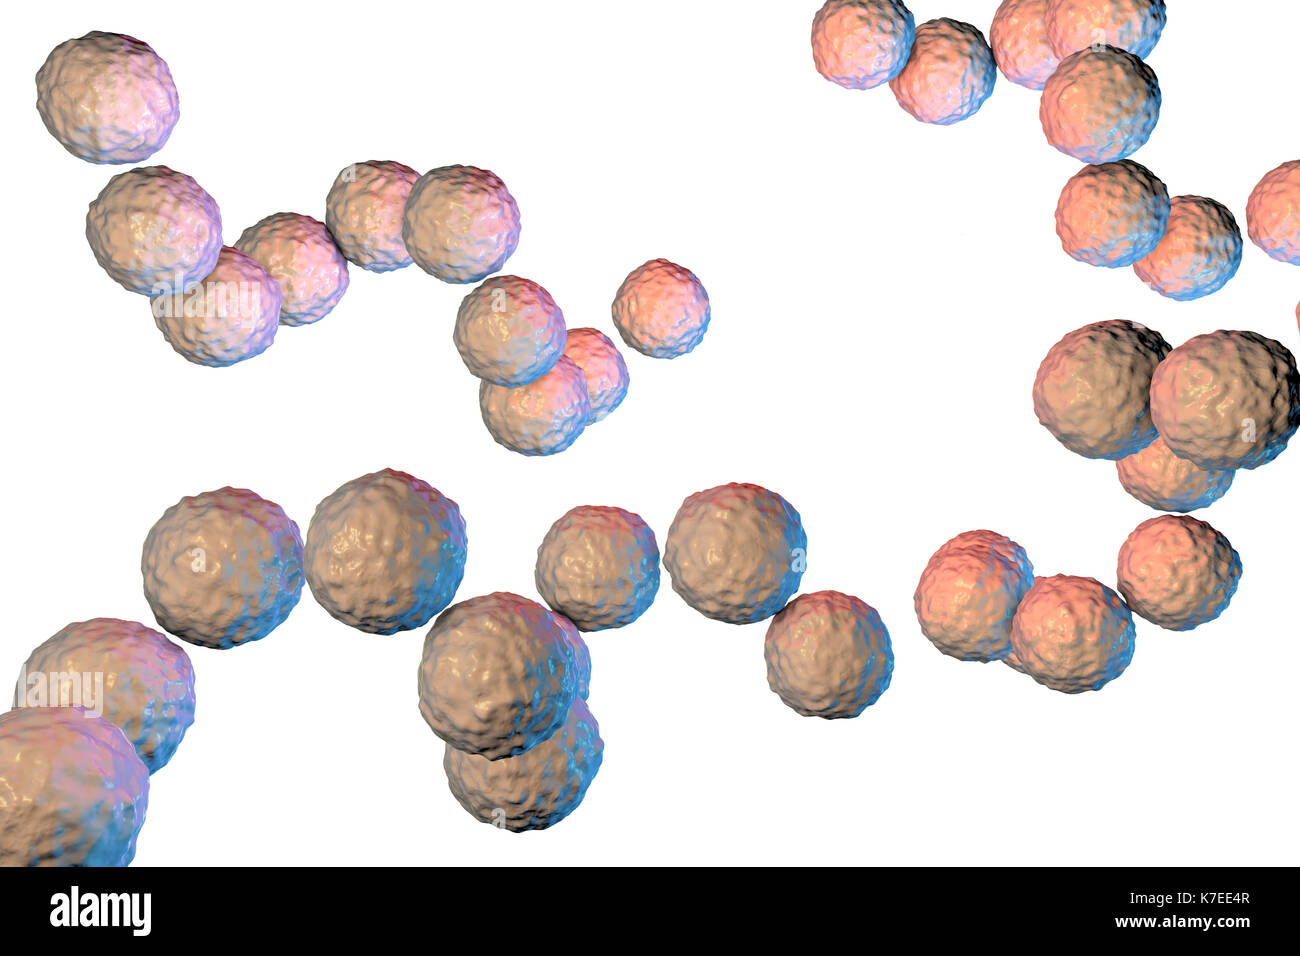 Streptococcus pyogenes bacteria. 3D computer illustration of Streptococcus pyogenes, or group-A Streptococcus, bacteria. S. pyogenes is a gram-positive spherical (coccus) bacteria. Many humans may carry it harmlessly in their throat or on the skin. Pathogenic strains can cause mild skin infections such as impetigo, uterine infection after childbirth, and blood poisoning (septicaemia). However, they can occasionally cause severe and even life-threatening disease - Streptococcus group A1 can be a deadly form of flesh eating bacteria. Stock Photo